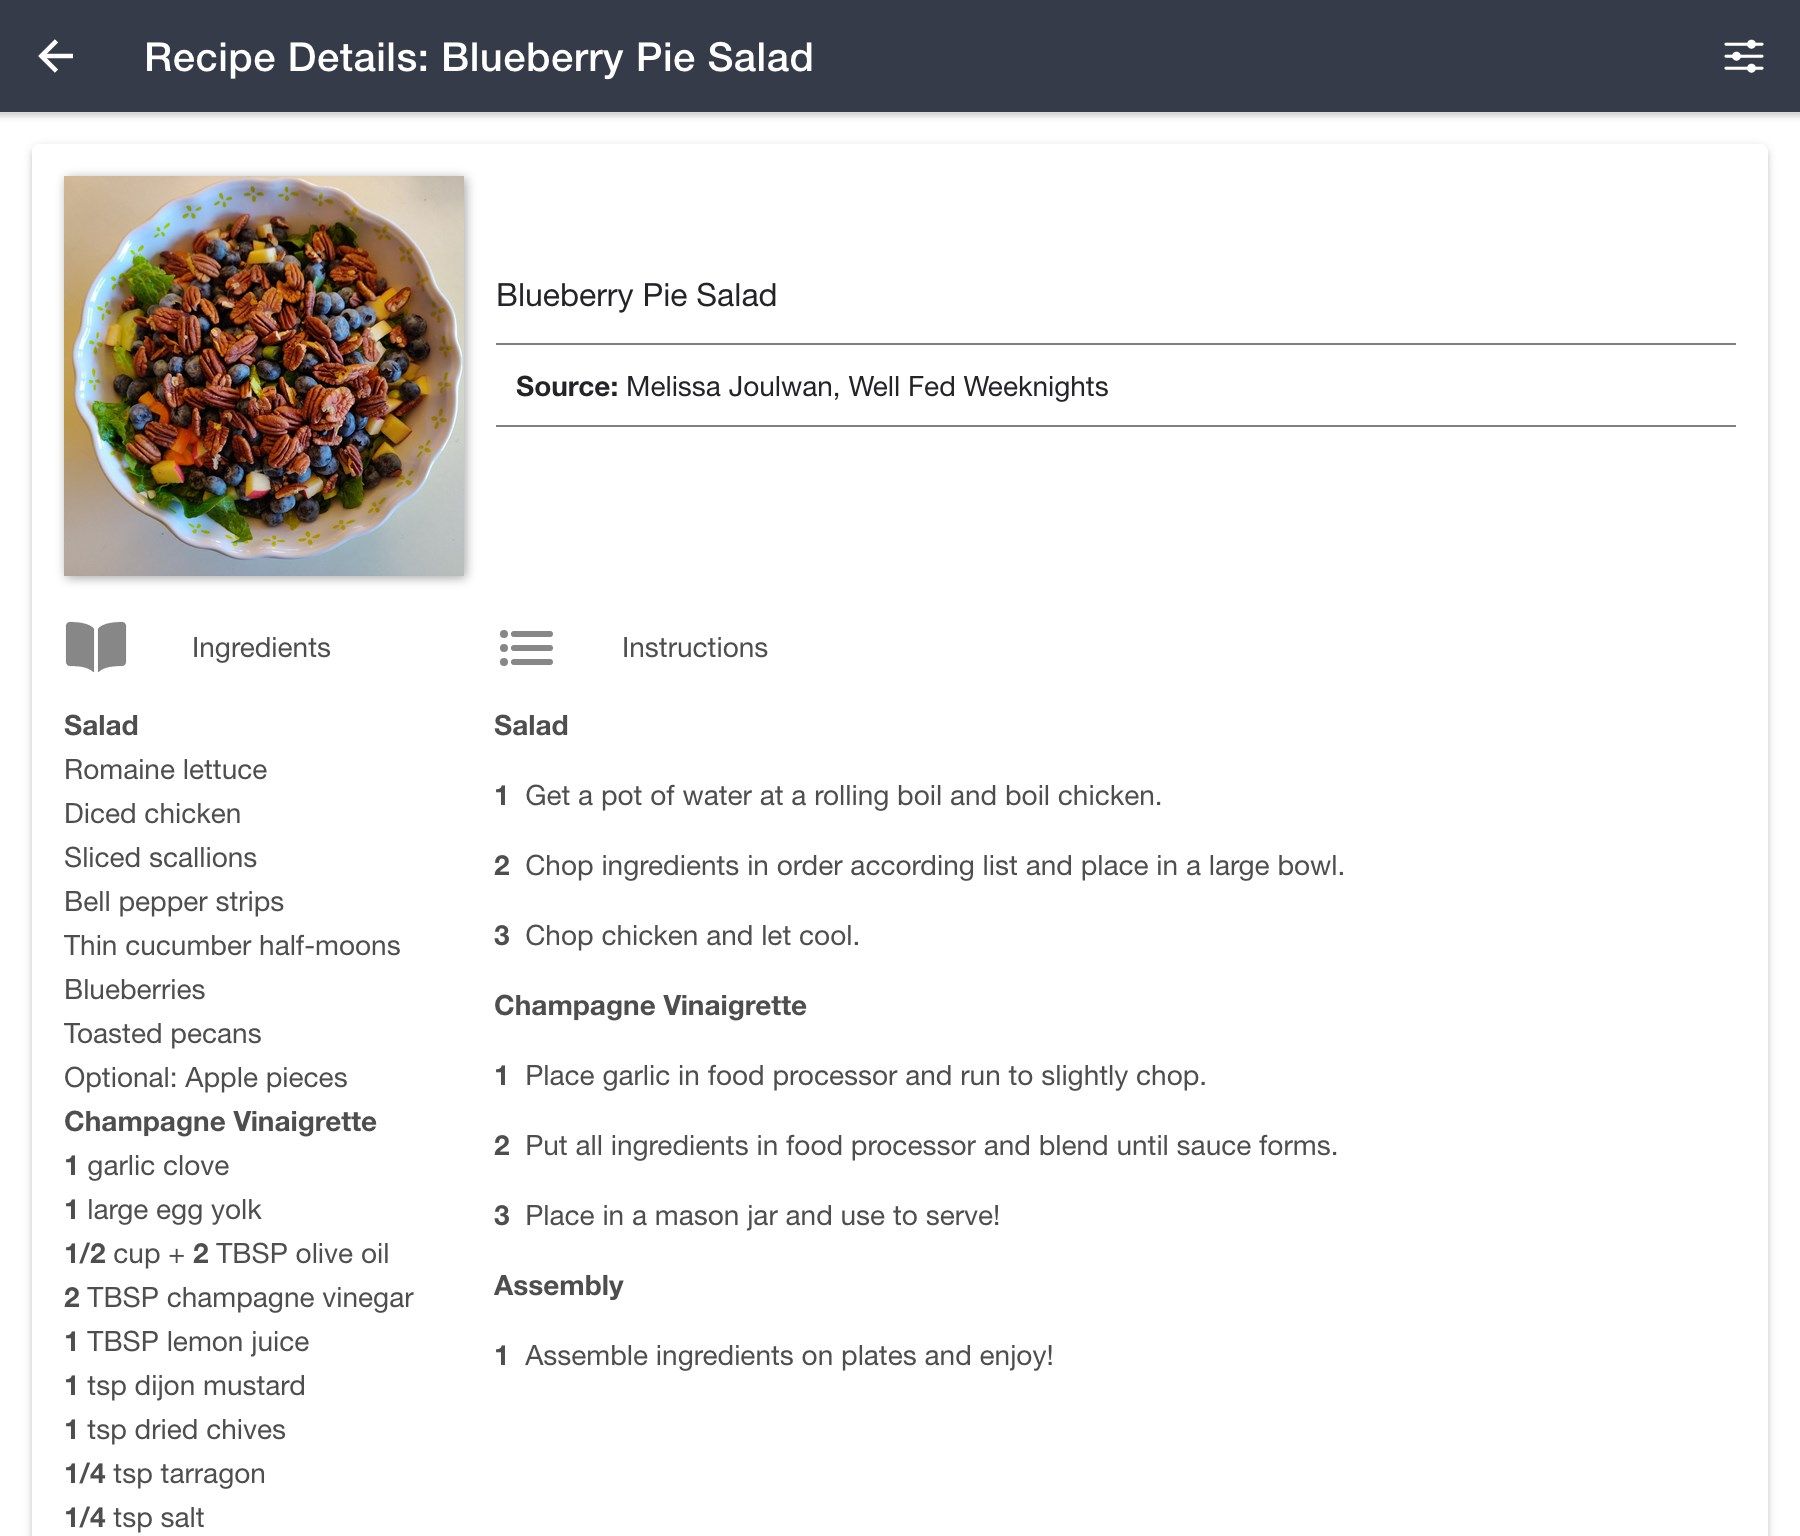 Viewing an example recipe